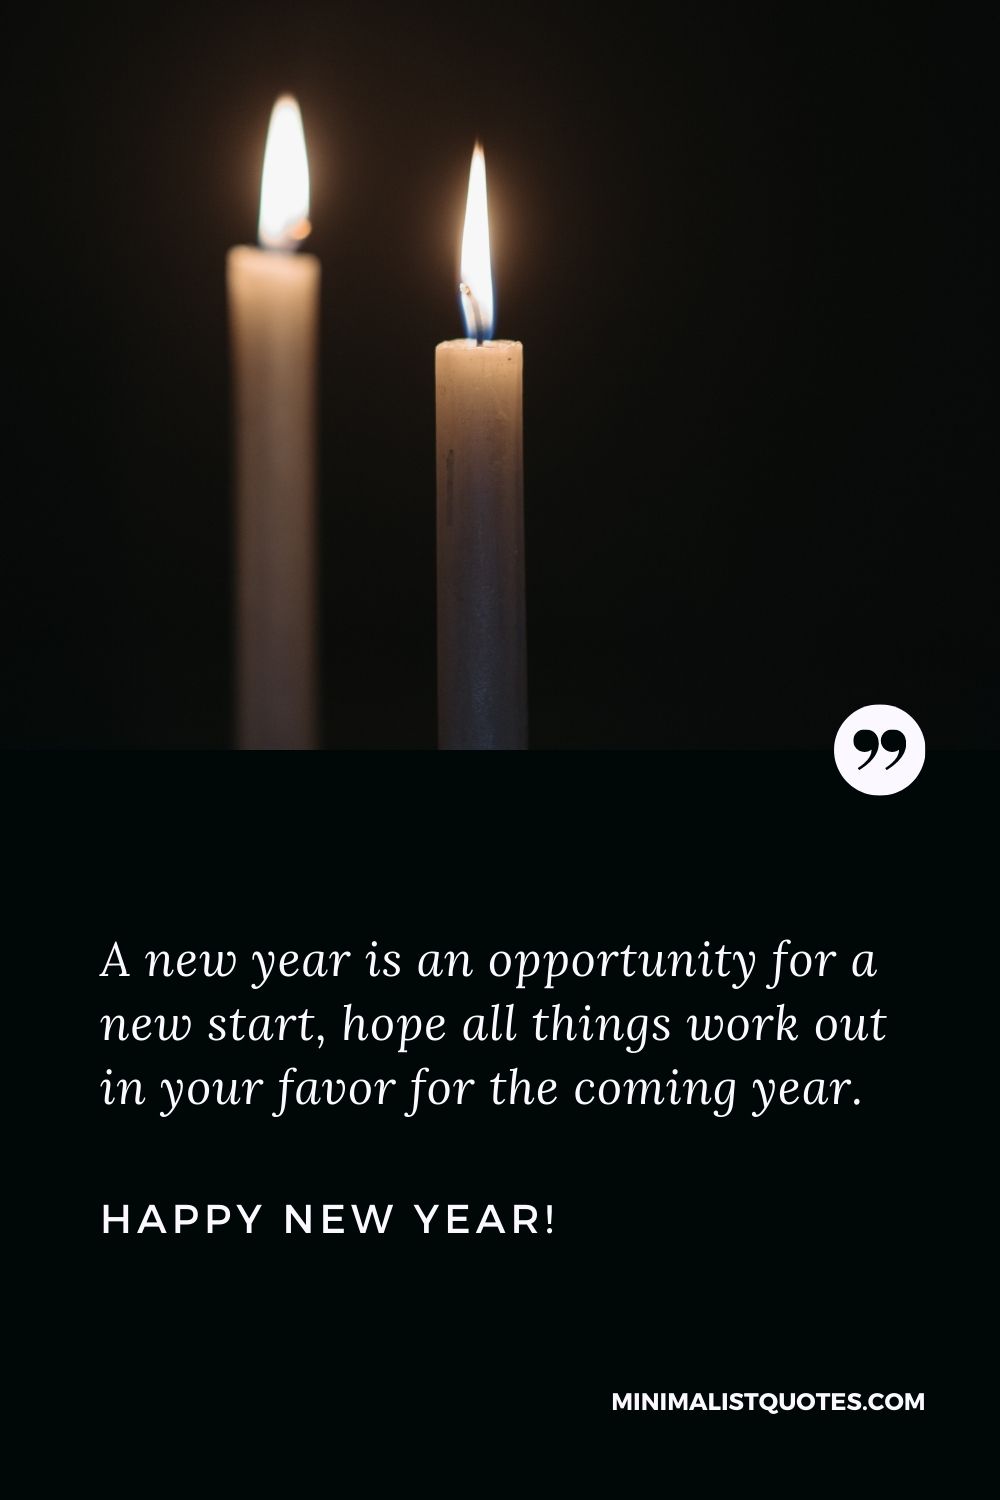 New Year Wishes: A new year is an opportunity for a new start, hope all things work out in your favor for the coming year. Happy New Year!